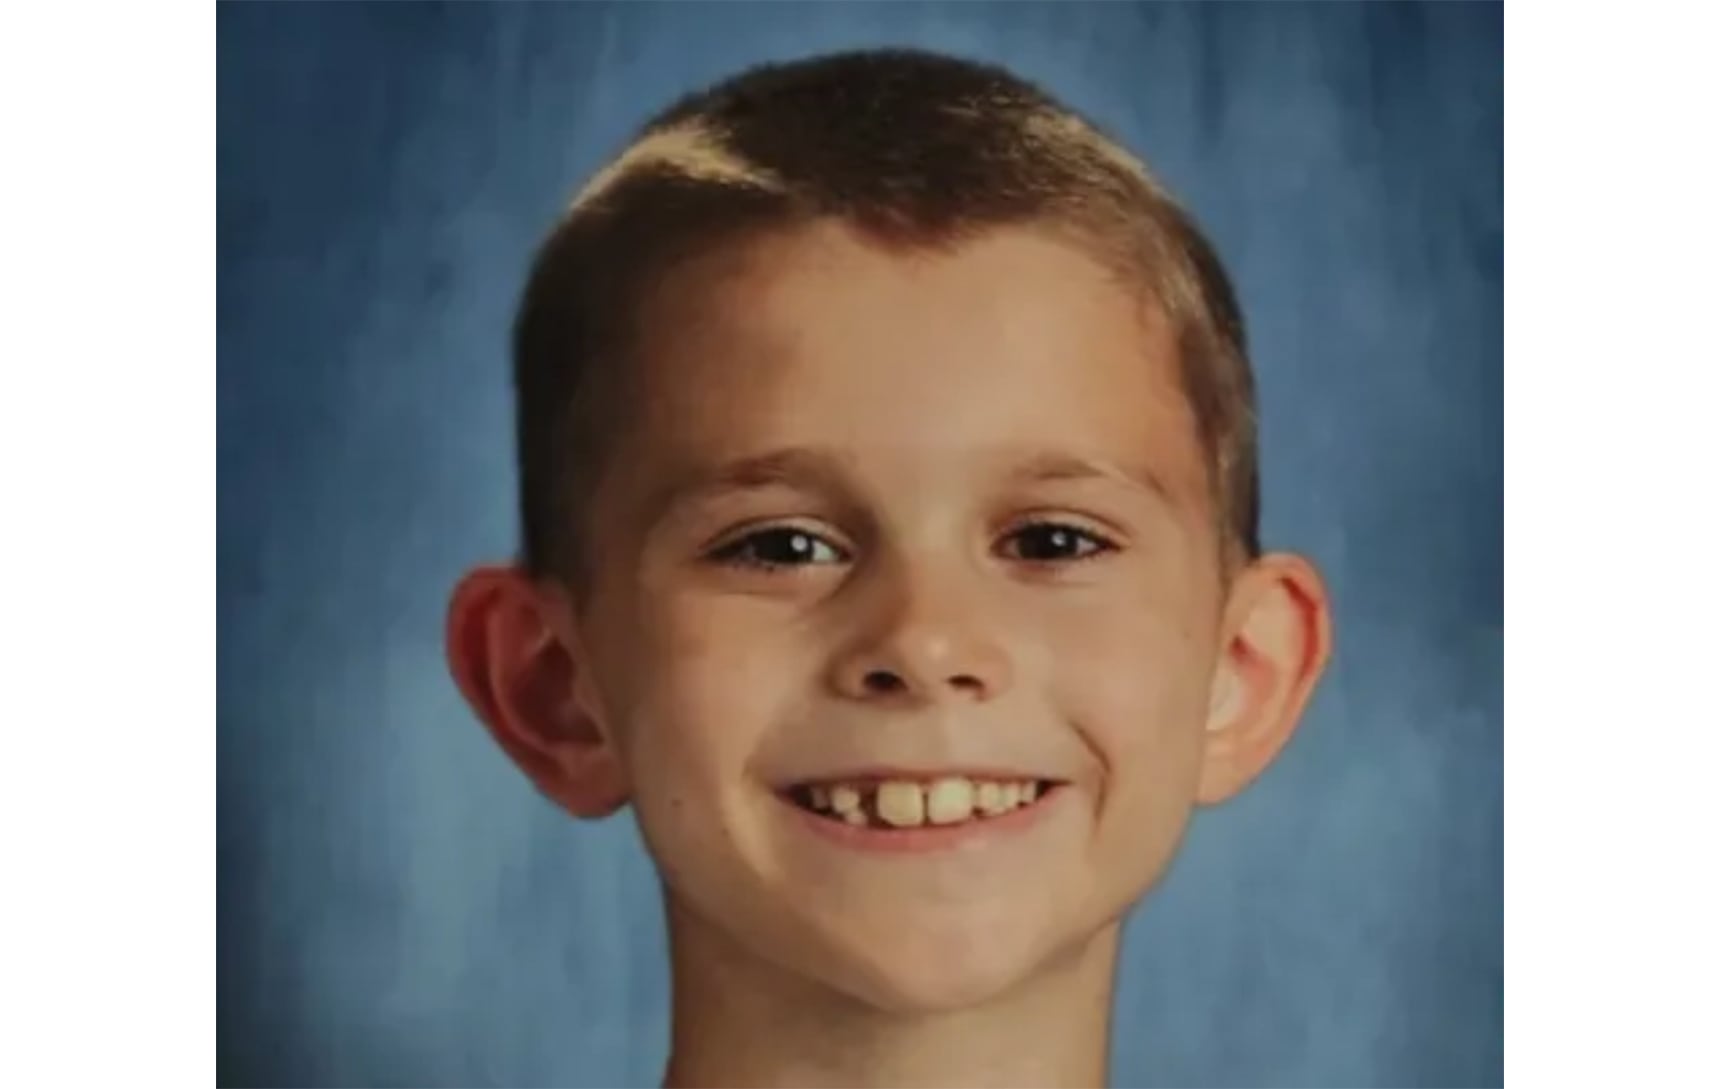 Utah boy dies after father, stepmother and brother abuse him, investigators say